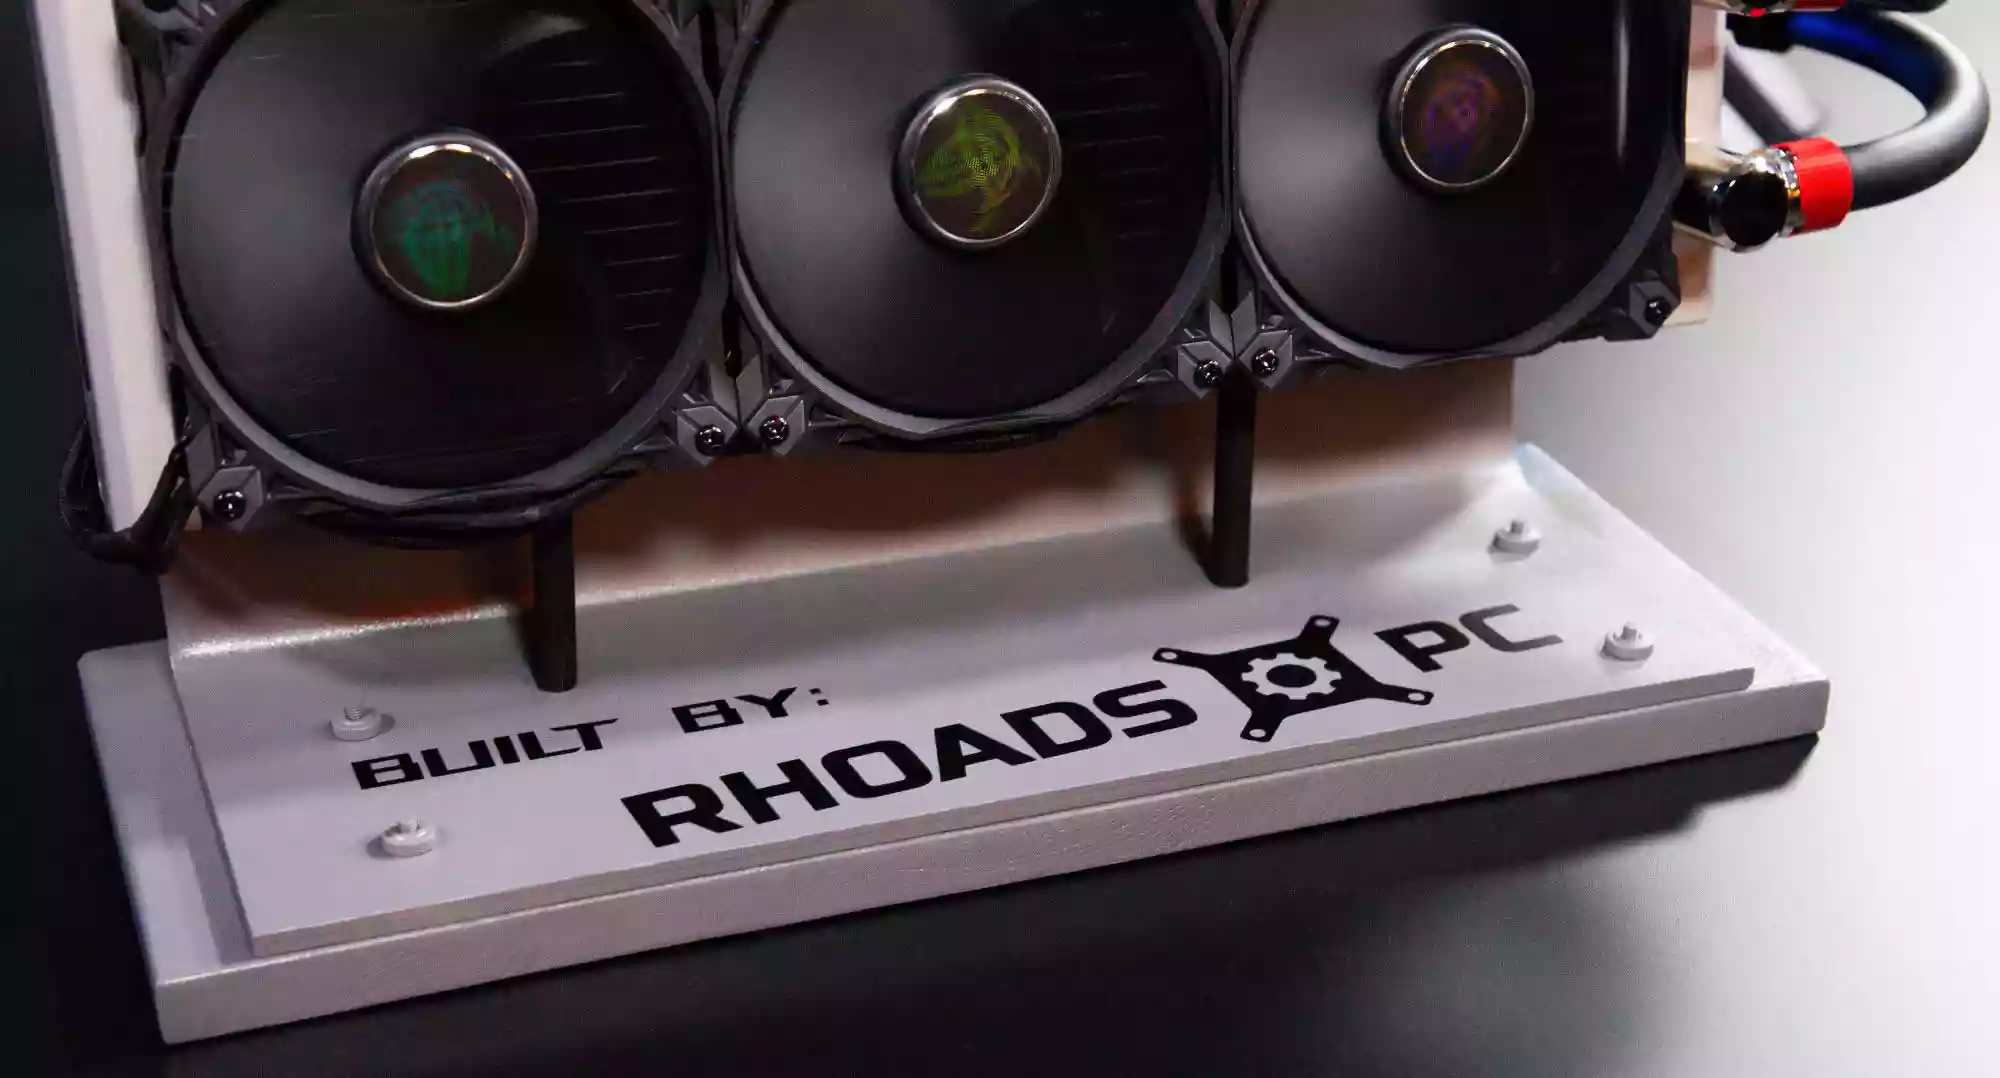 The custom base for the 360mm cooling loop with the text Built by RhoadsPC on it